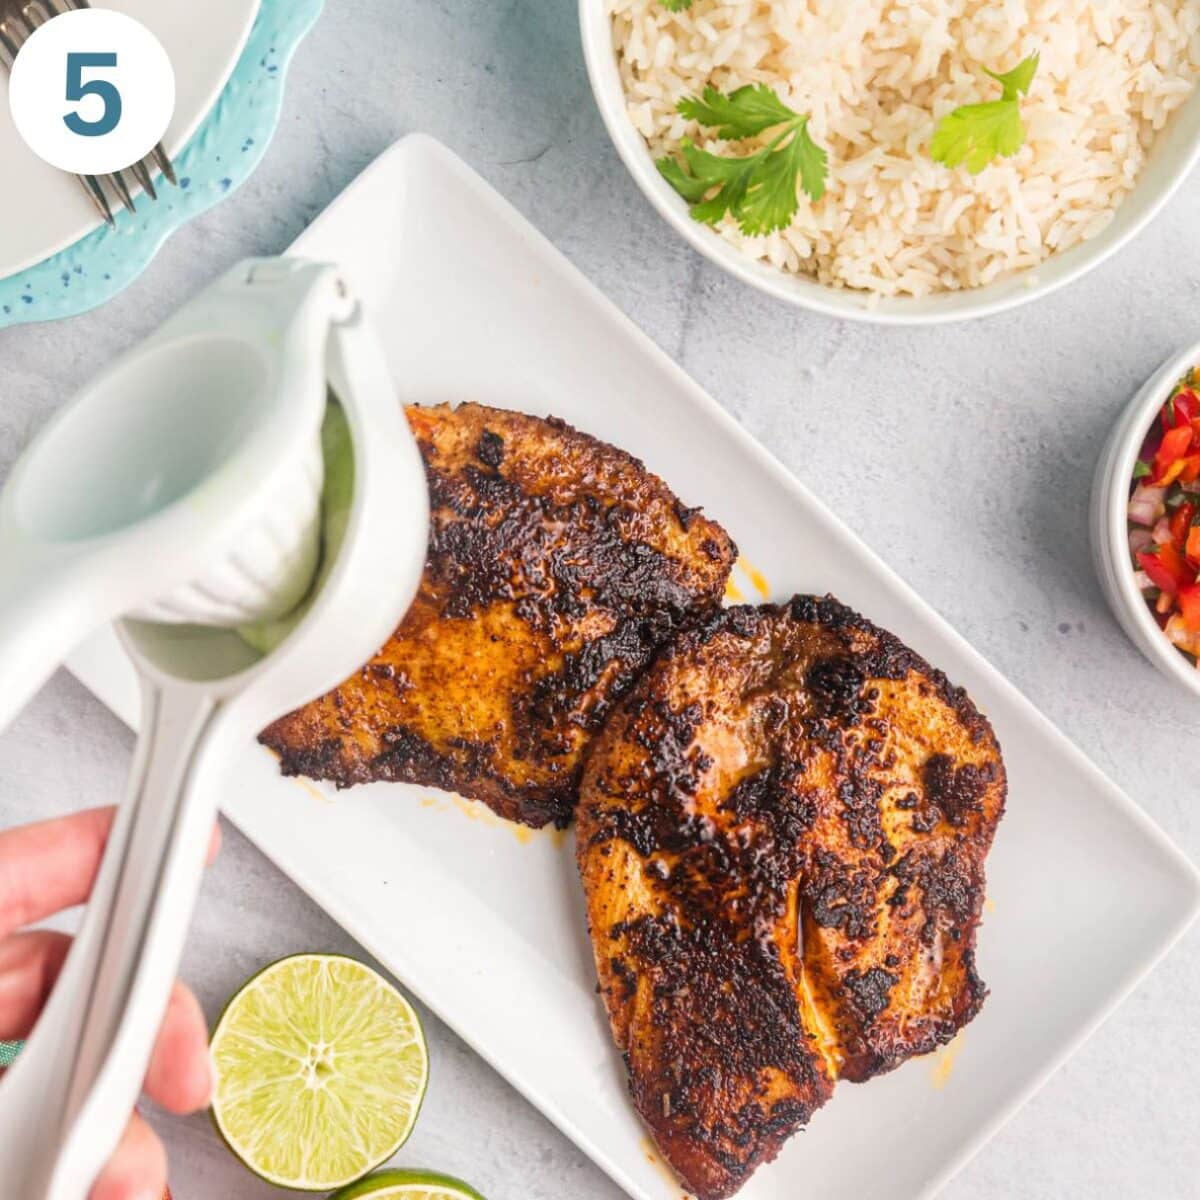 squeezing lime juice on fried tilapia